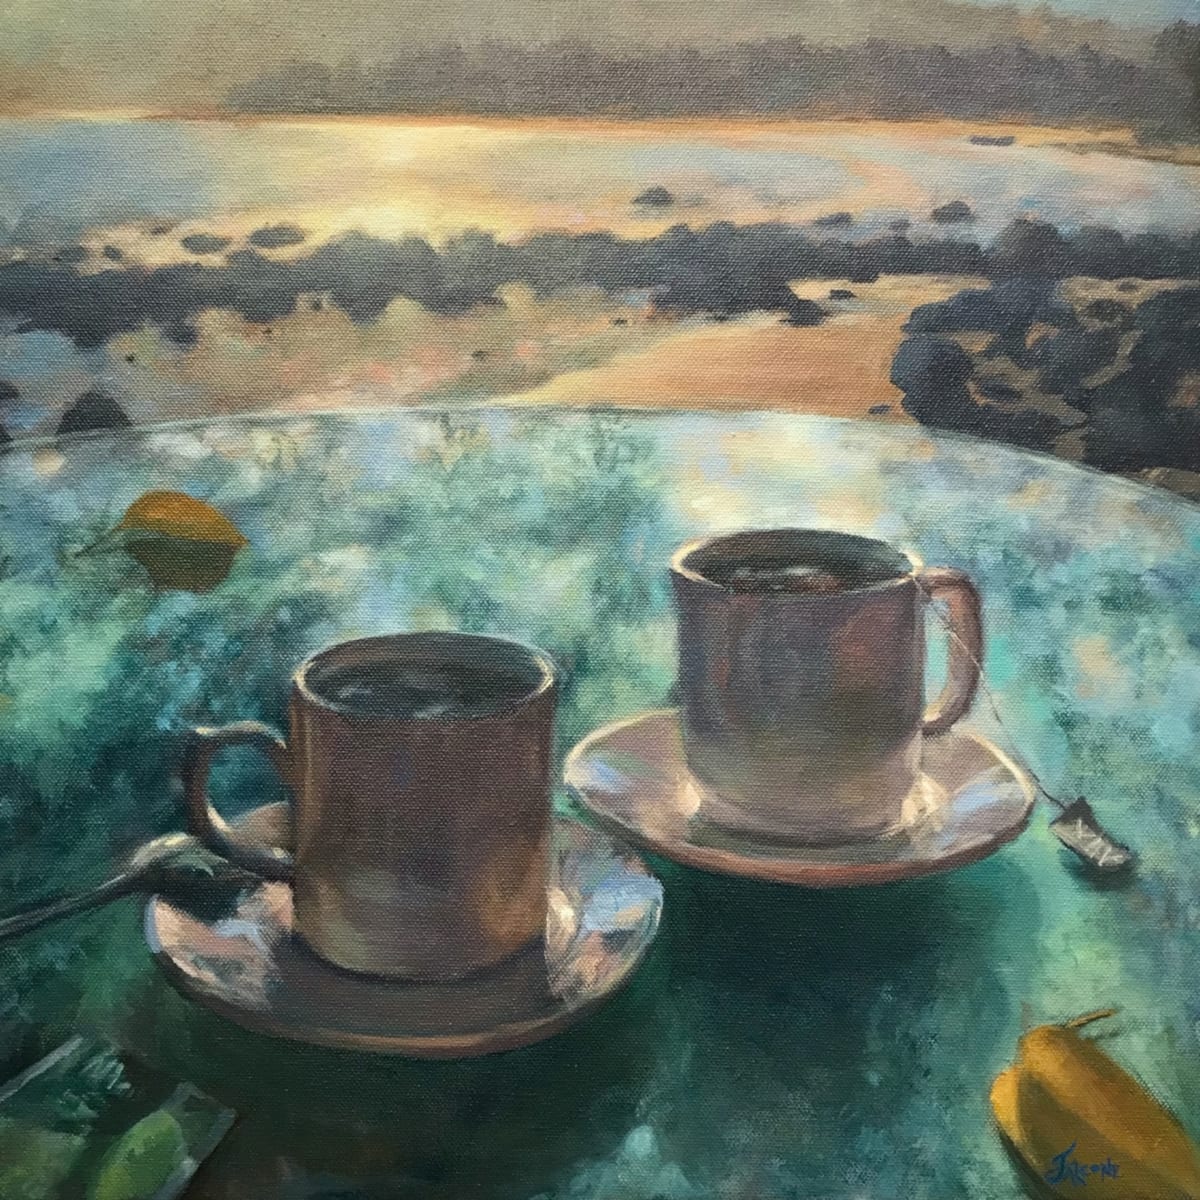 Te Verde by Jessica Falcone  Image: Enjoying a morning cup of green tea at Sayulita Beach, Mexico.